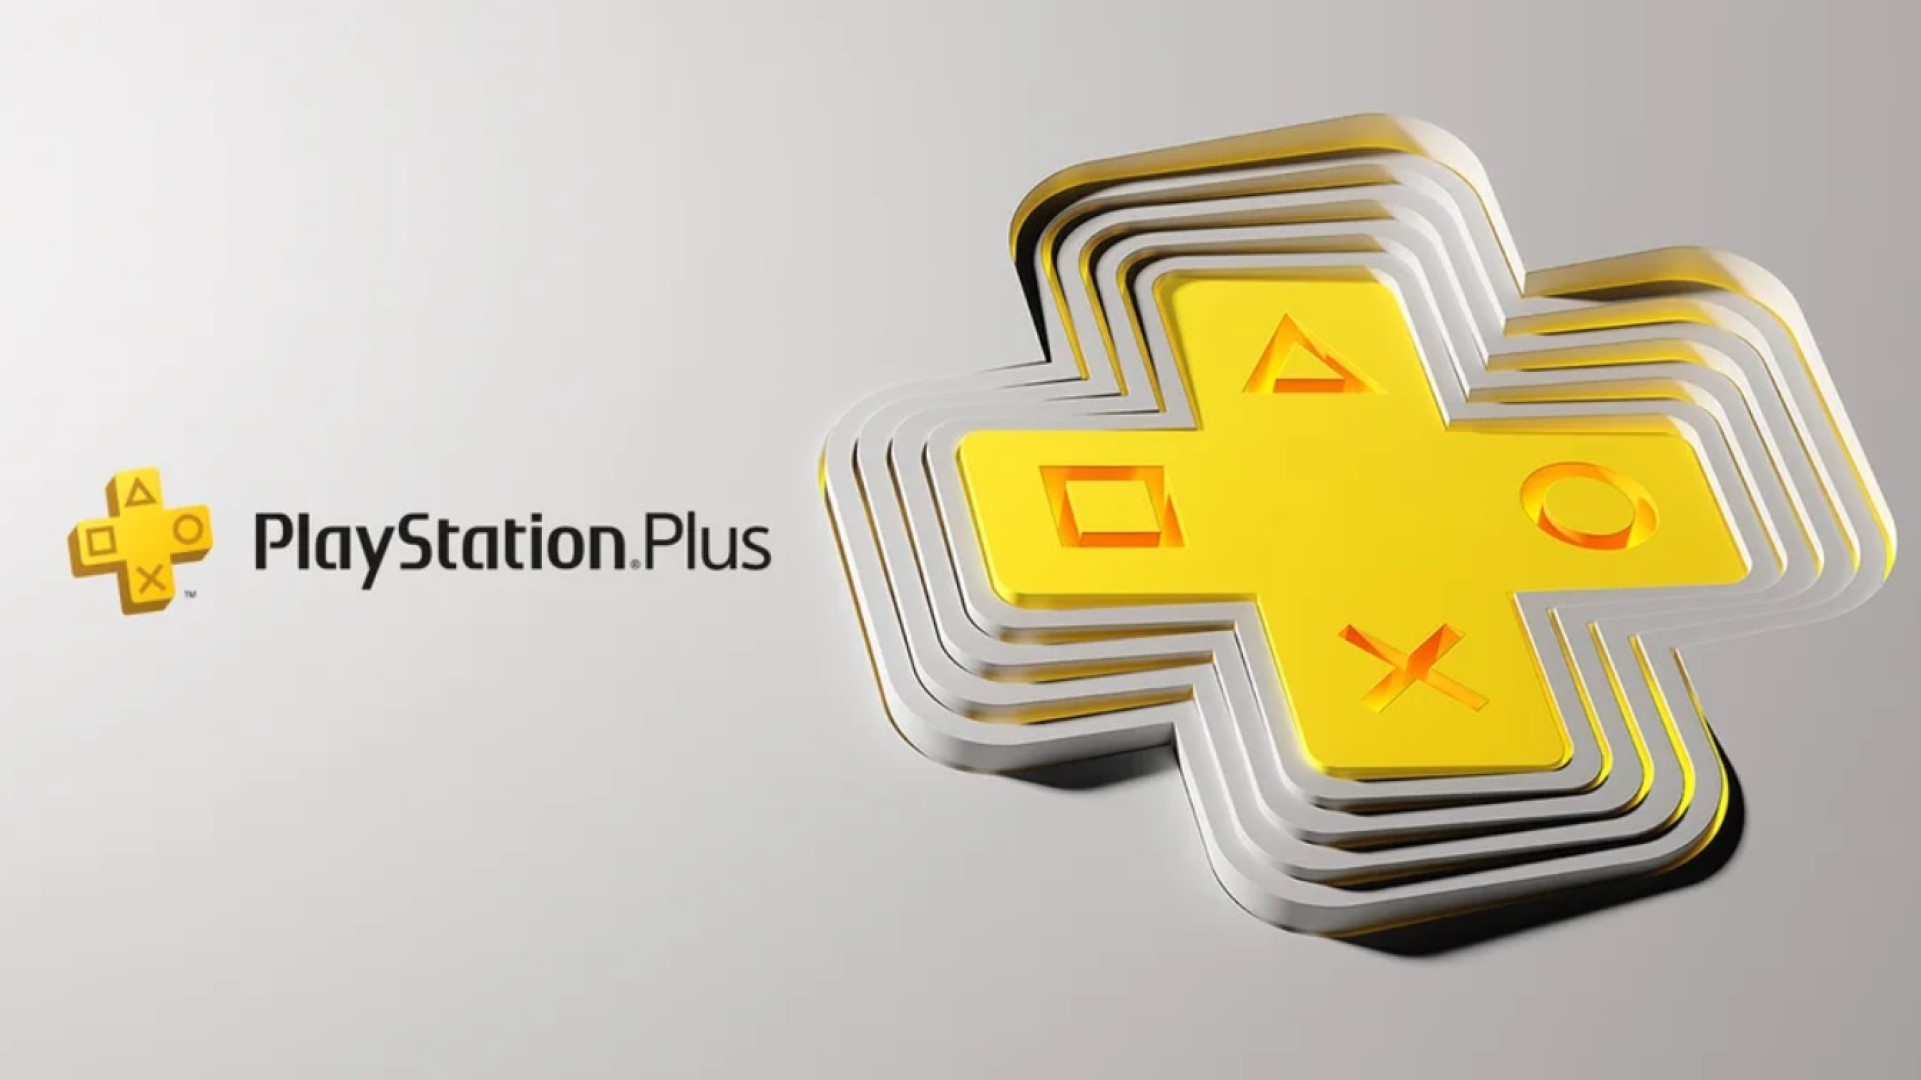 Japanese PS Plus Premium Lineup Shares First Look at PS3 Games